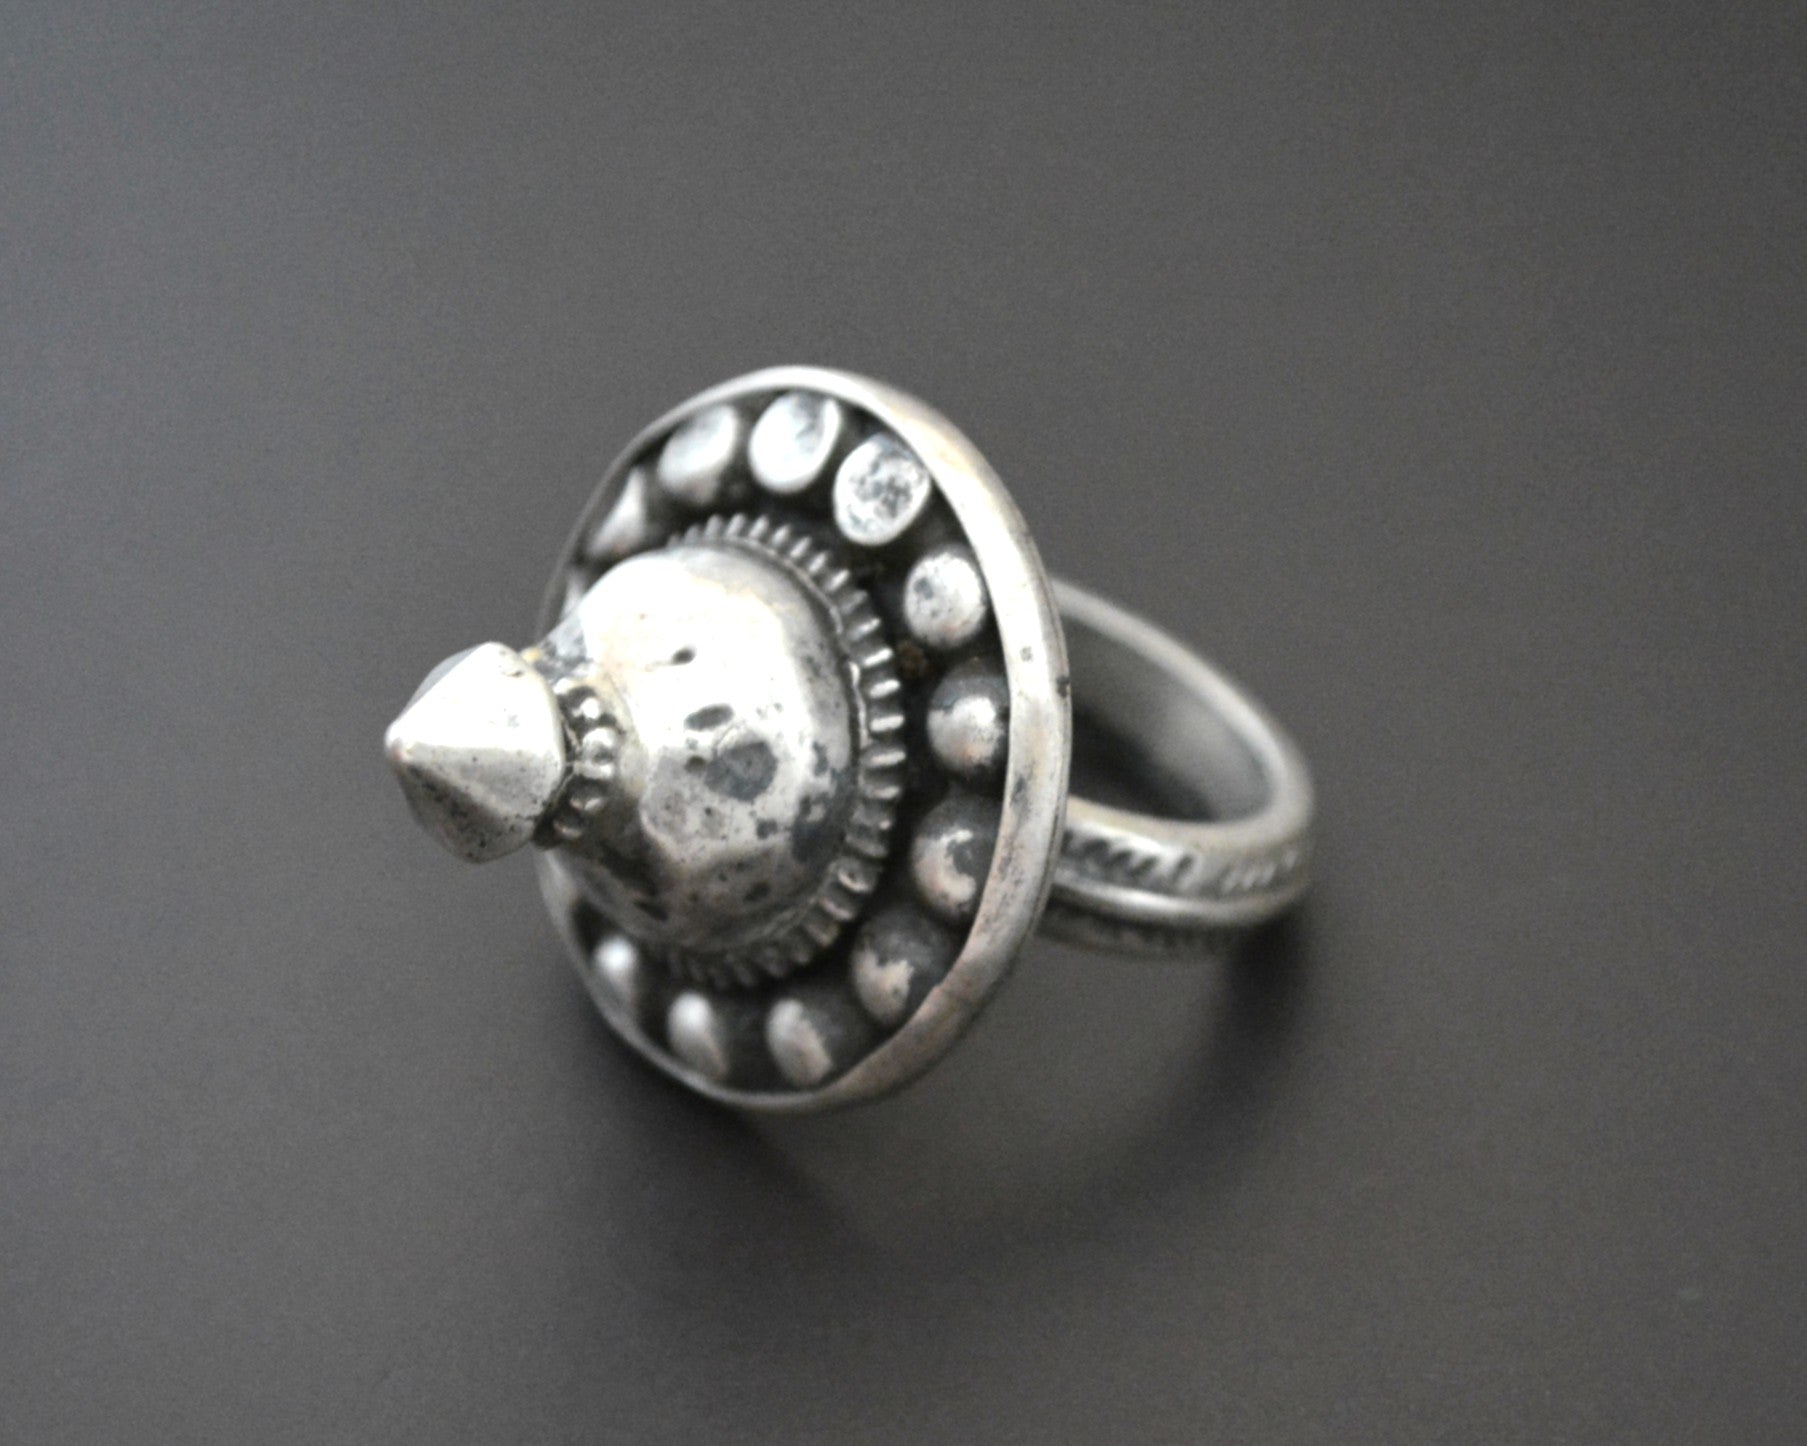 Rajasthani Silver Spike Ring - Size 8